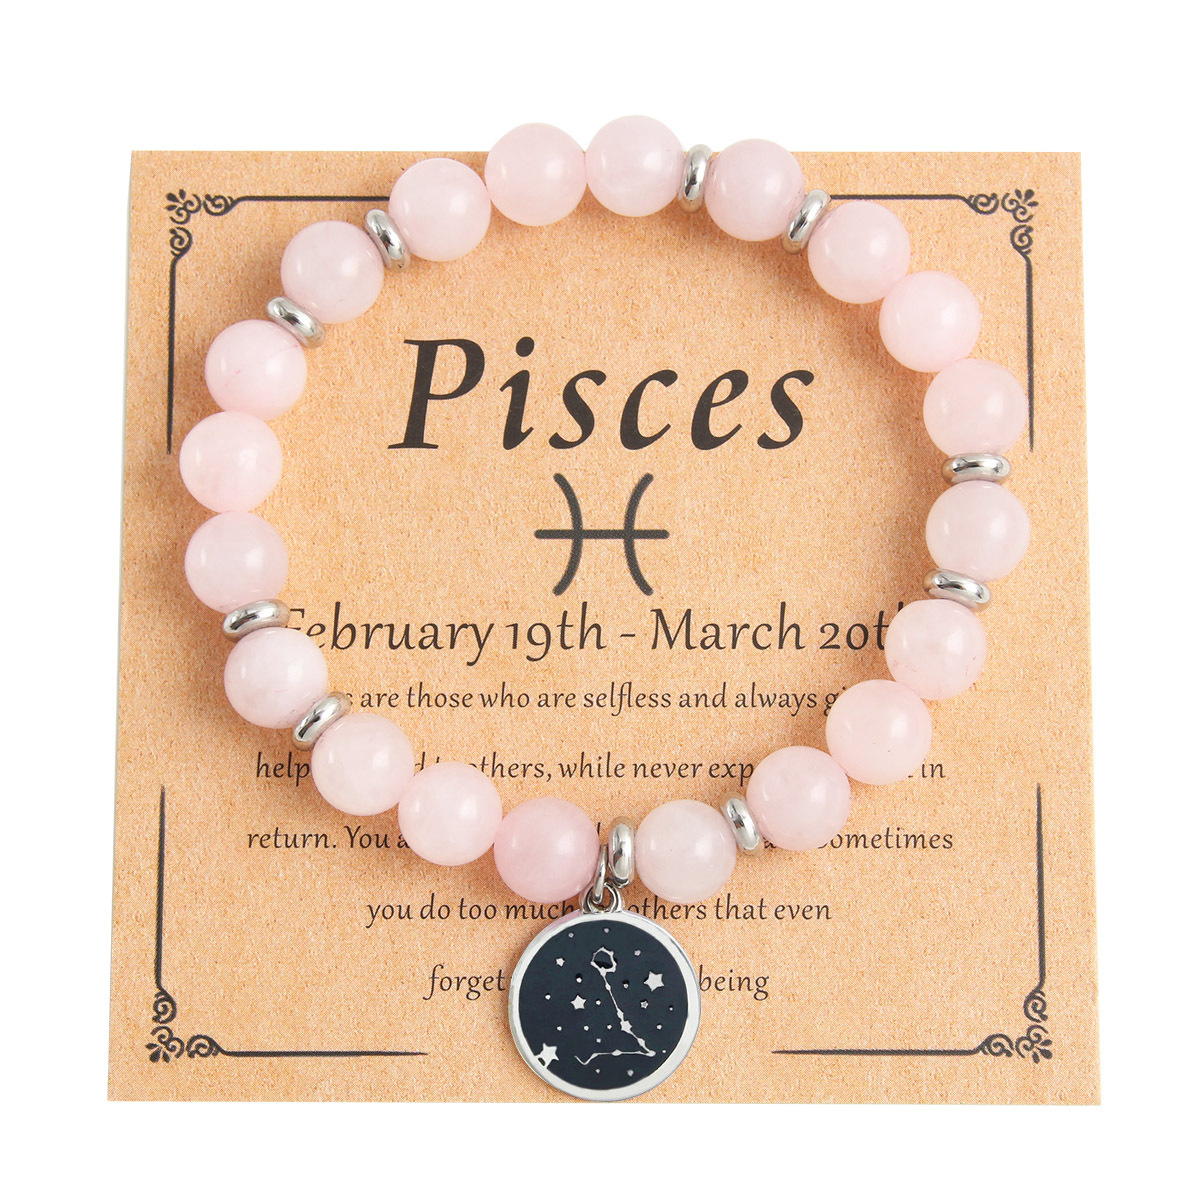 Pisces - Pink Crystal